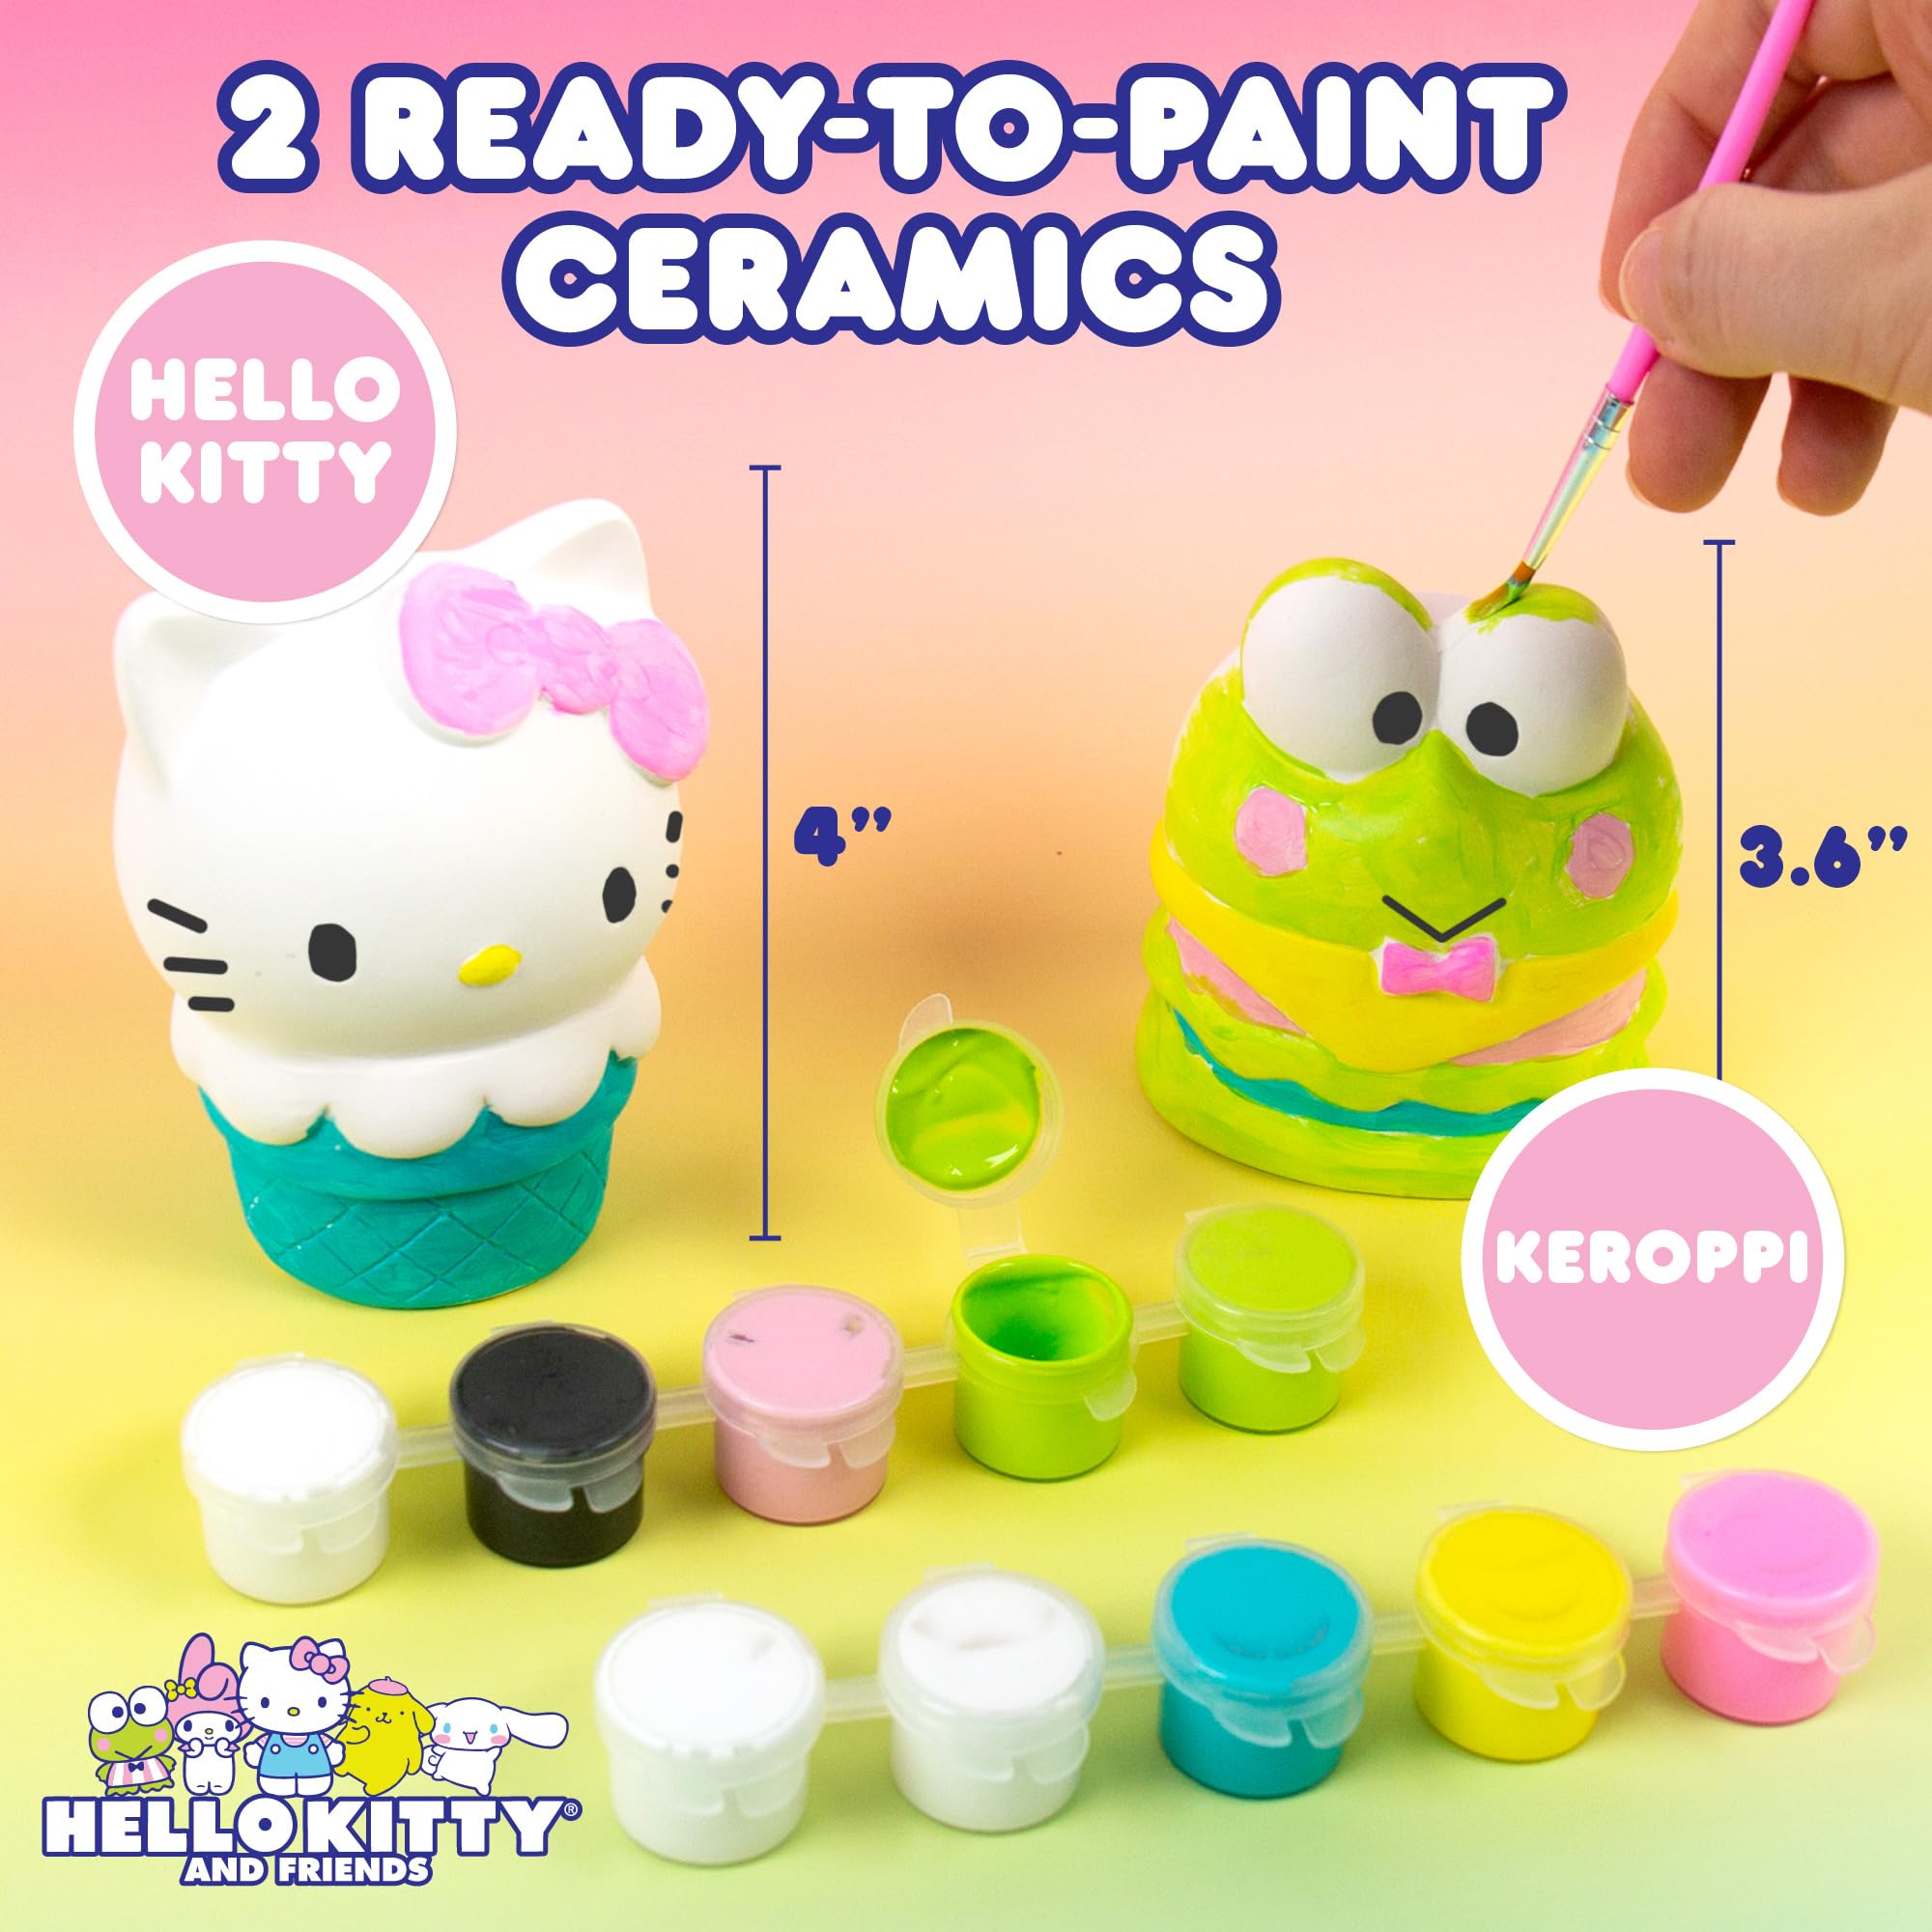 Hello Kitty Sanrio and Friends Paint Your Own Figurines Arts and Crafts Kit, Ceramic Paintable Keroppi, Kawaii Painting Kit for Kids, Craft Kits for Kids 8-12, Ages 8+